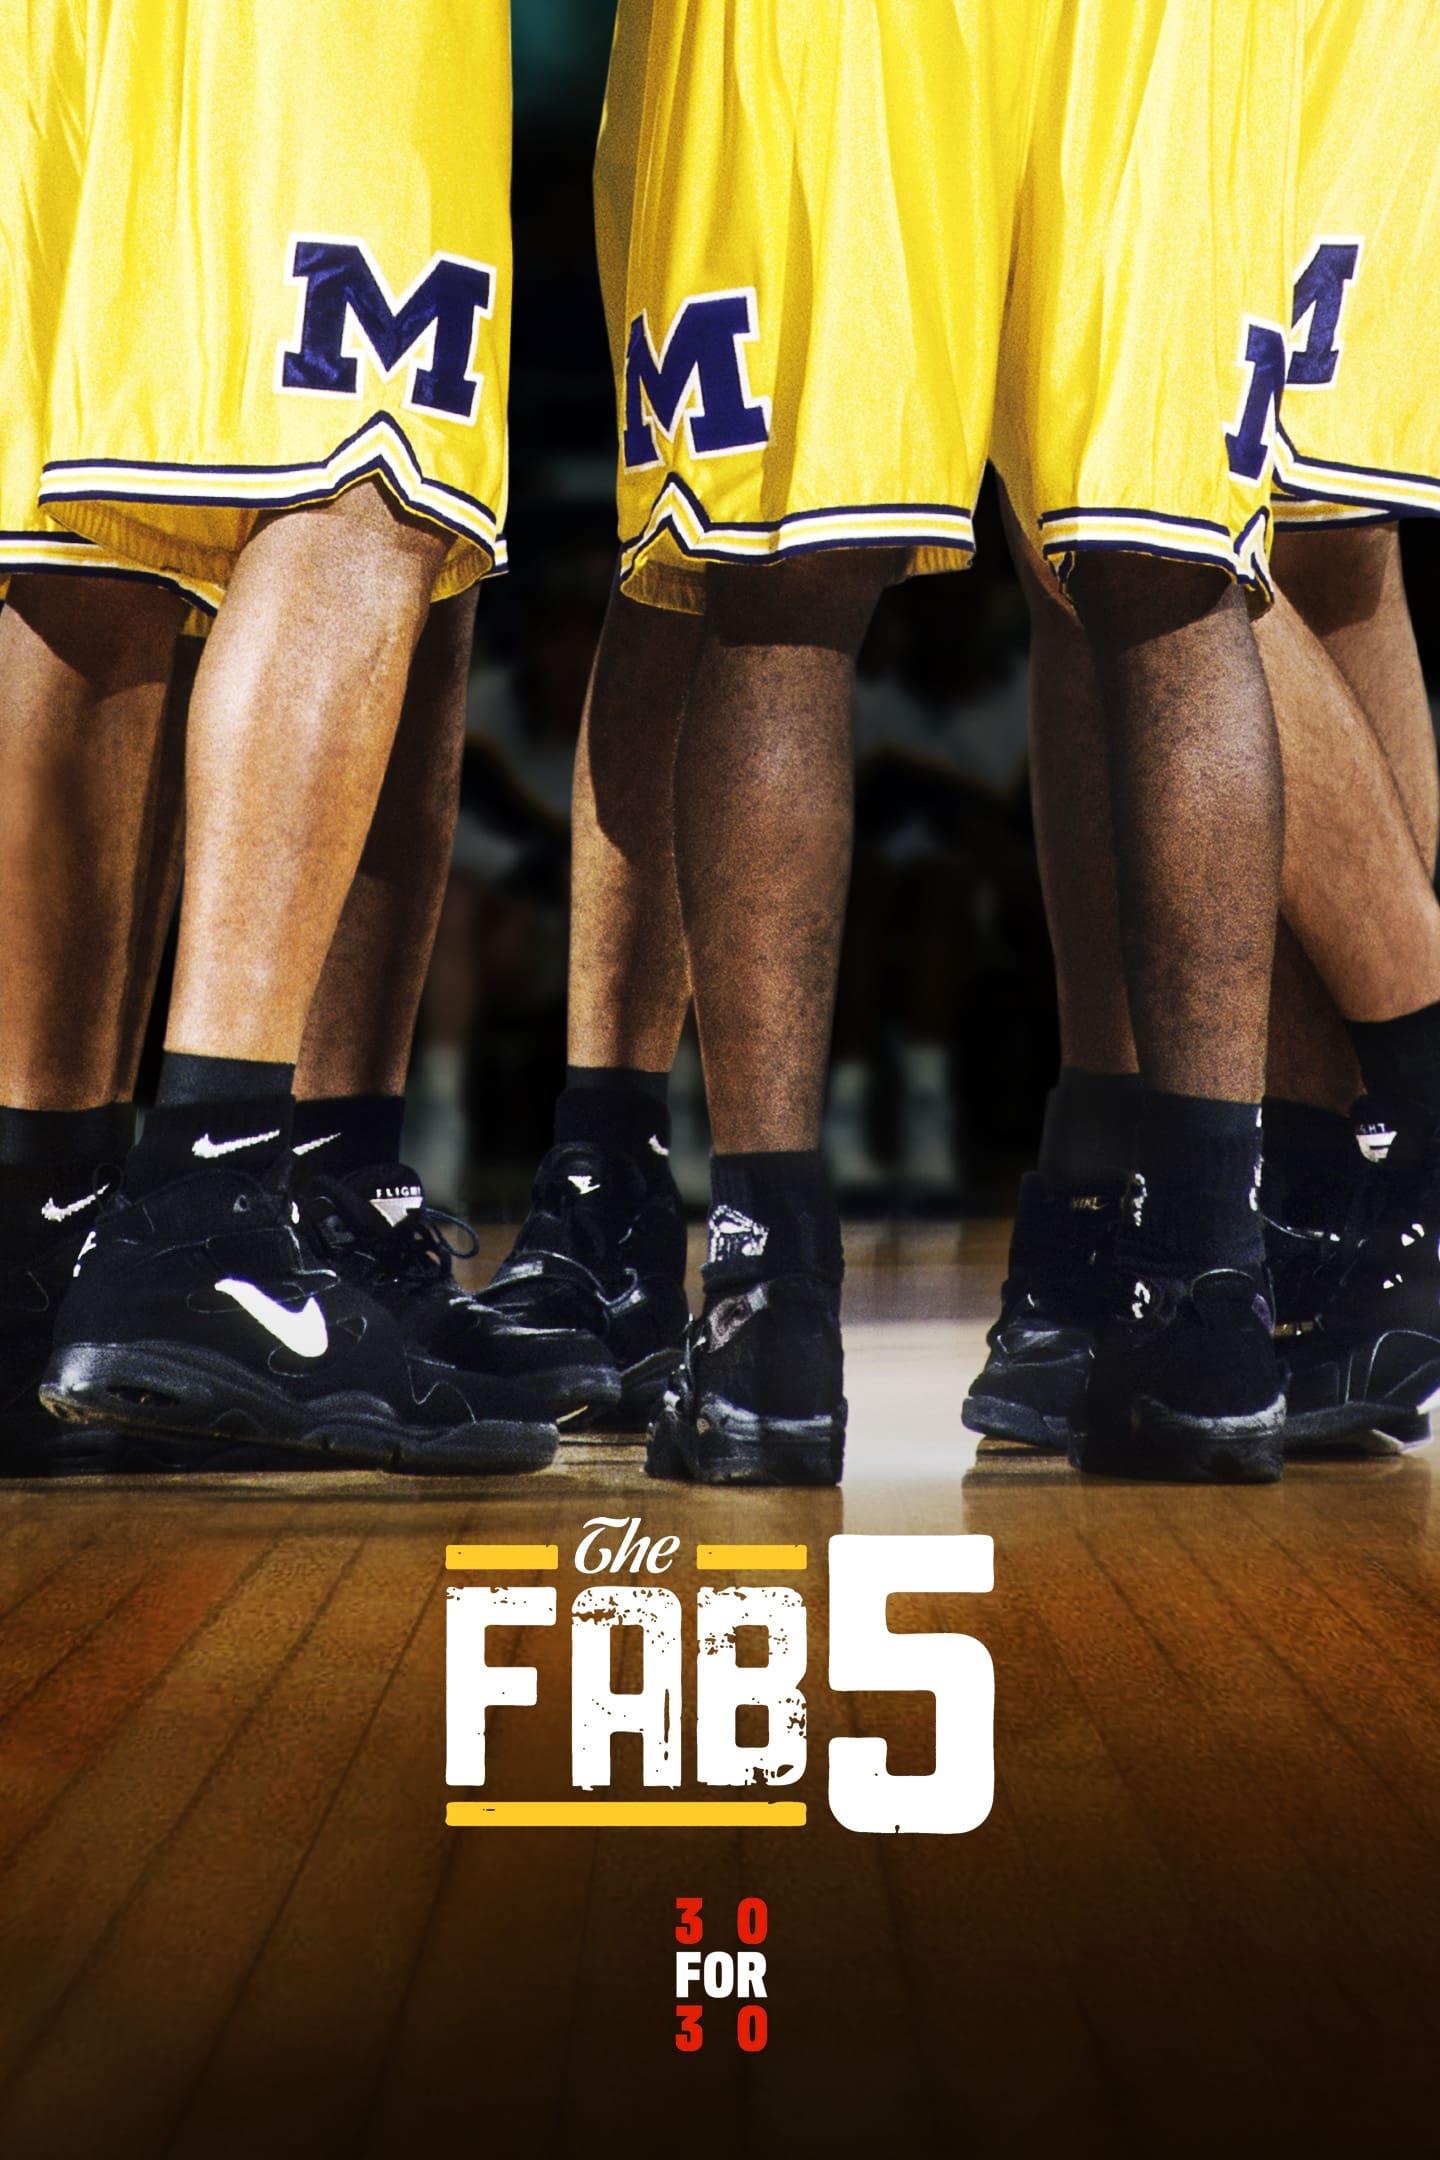 The Fab Five poster